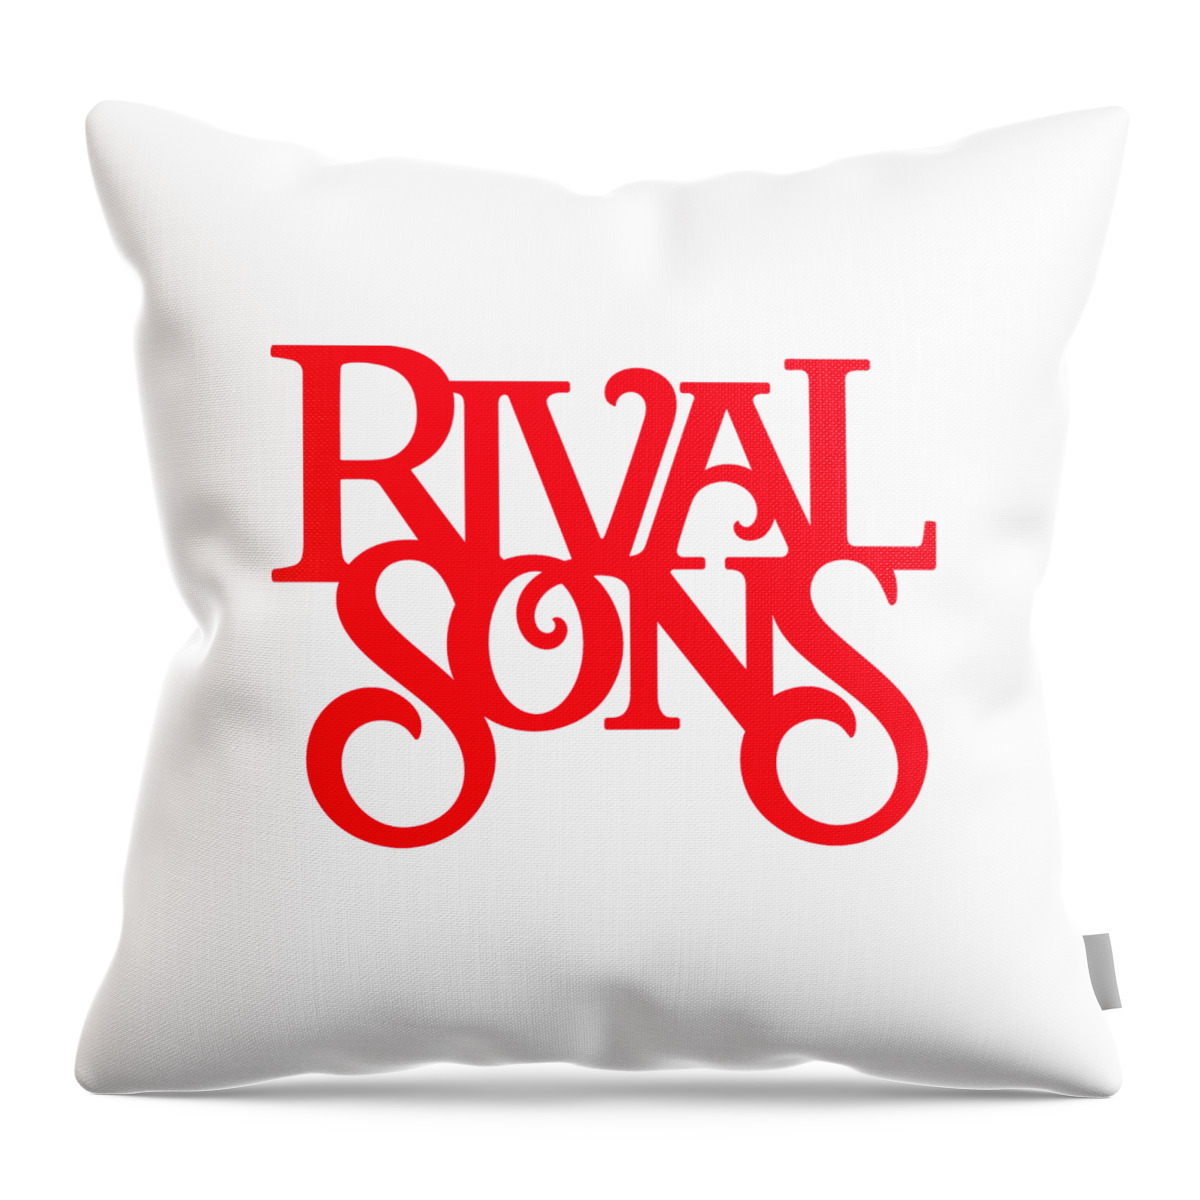 Rival Sons Throw Pillow featuring the digital art Rival Sons #4 by Jeslina Abc